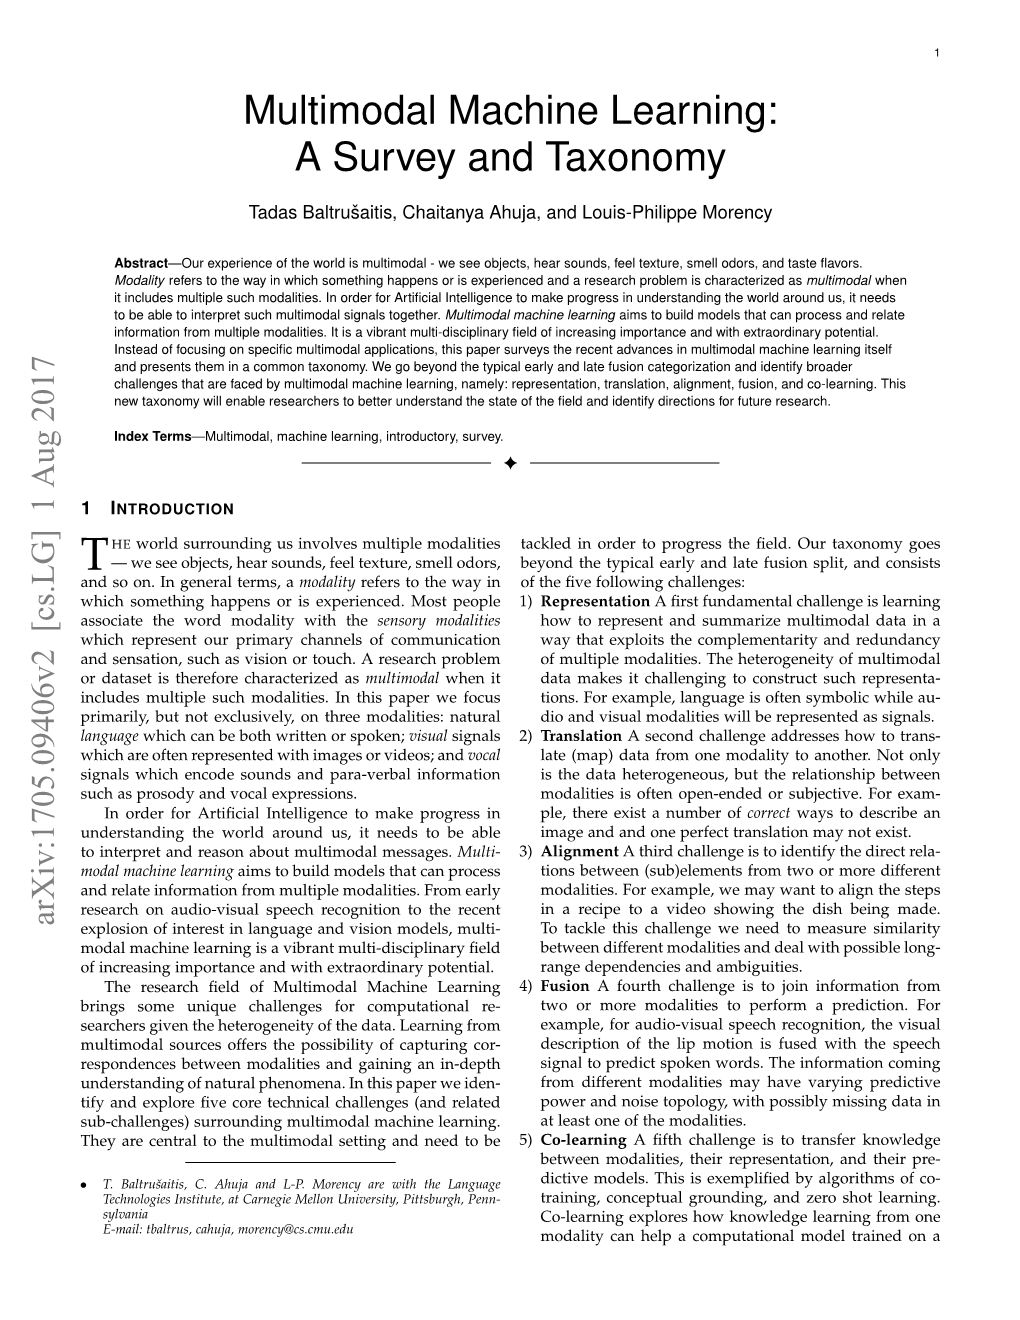 Multimodal Machine Learning: a Survey and Taxonomy